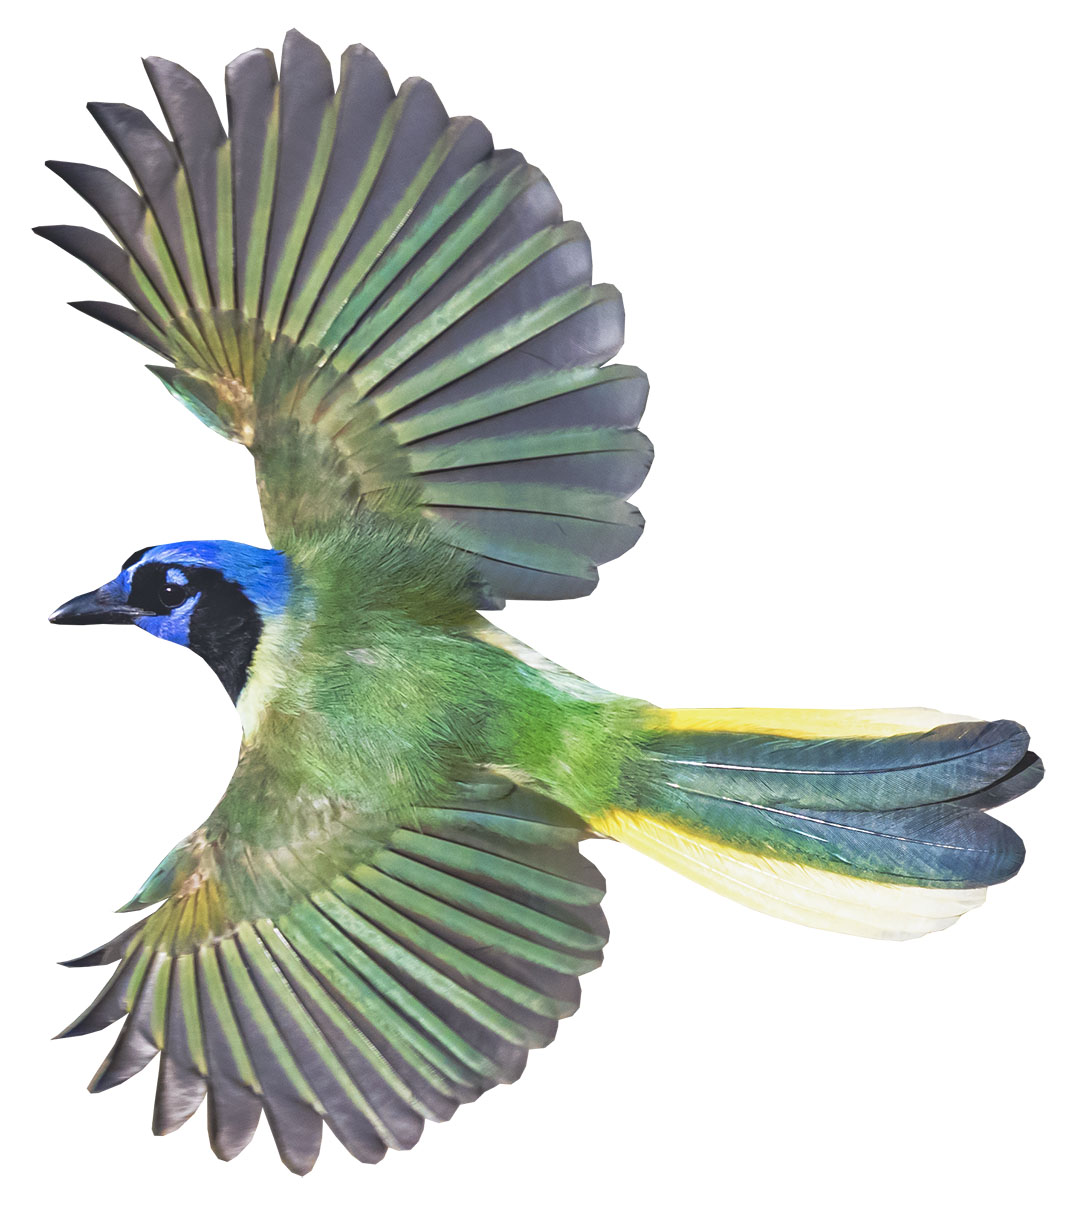 An illustration of a bright green bird with a blue head and large wingspan